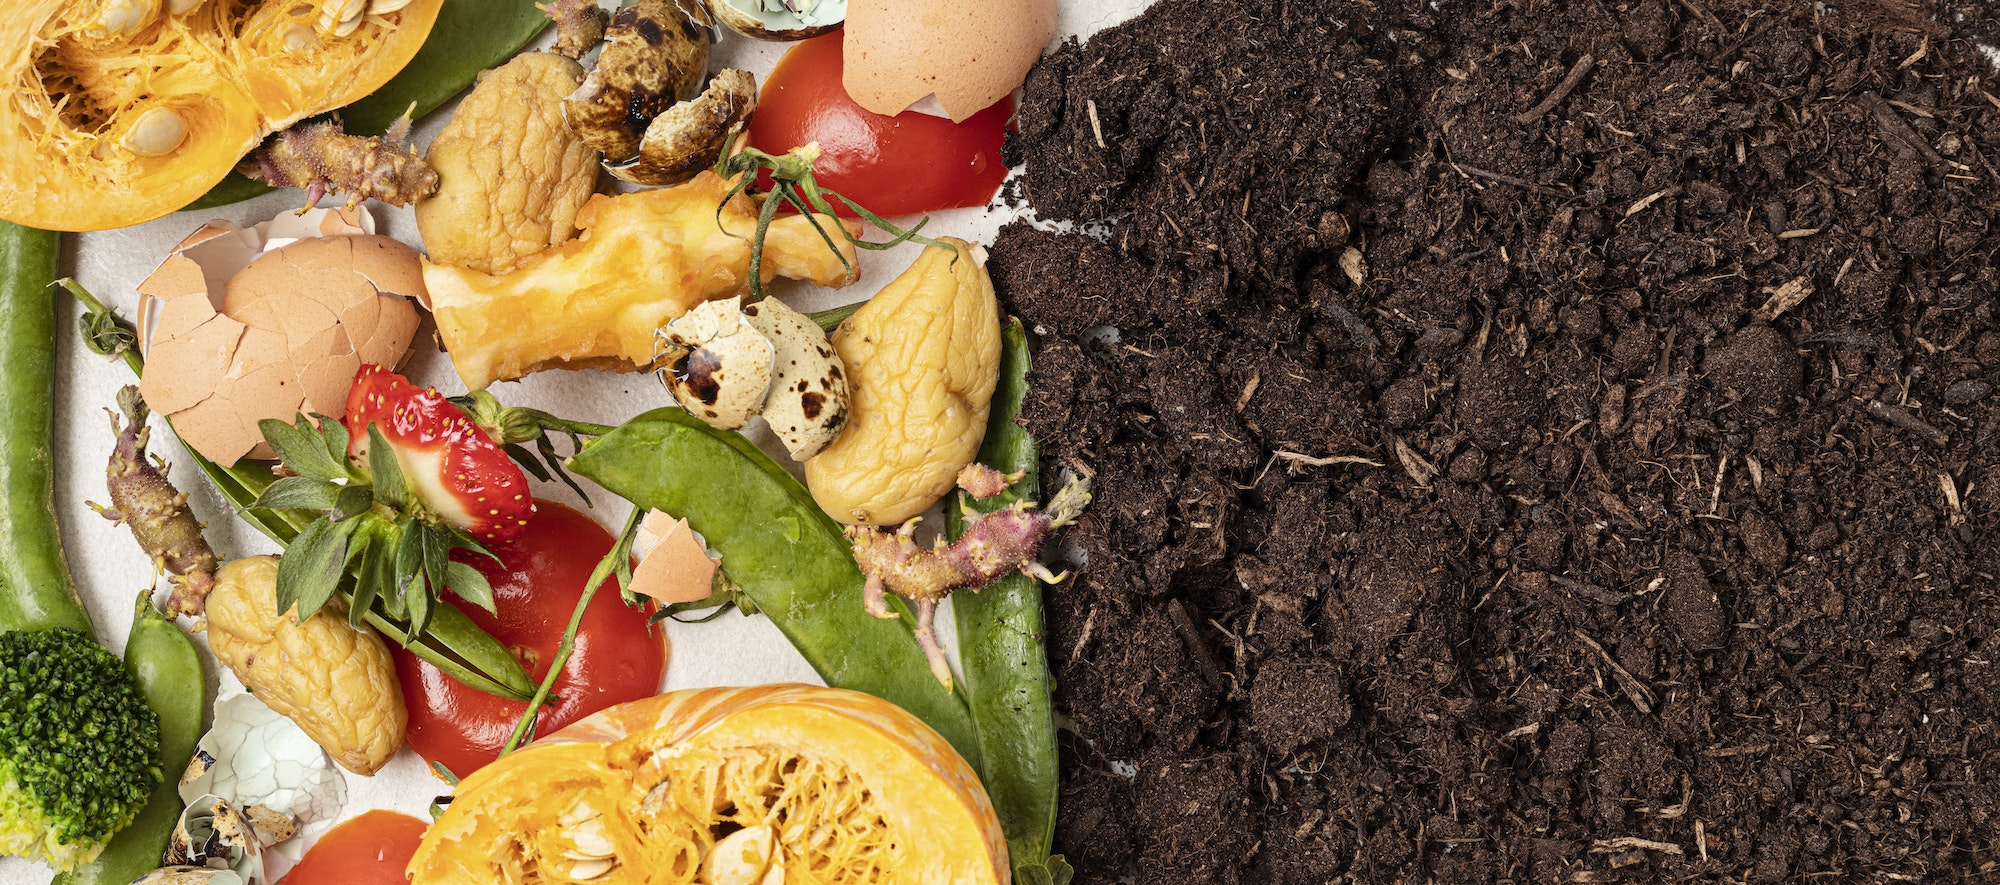 Food leftovers for compost and composted soil